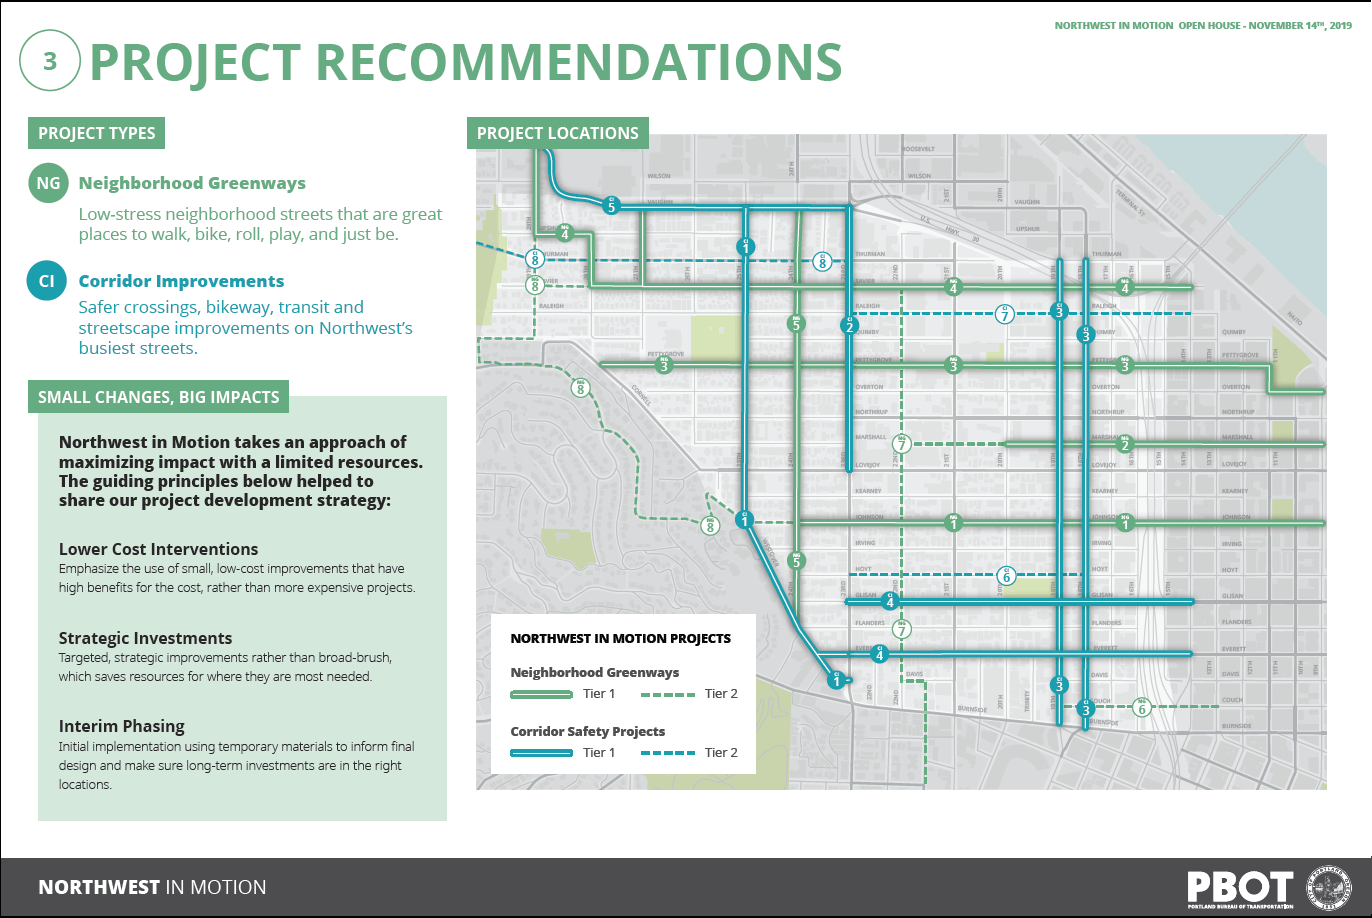 Board shows: A map shows the locations of projects throughout the Northwest neighborhood. Neighborhood greenway projects are shown in green, while corridor safety projects are shown in blue.